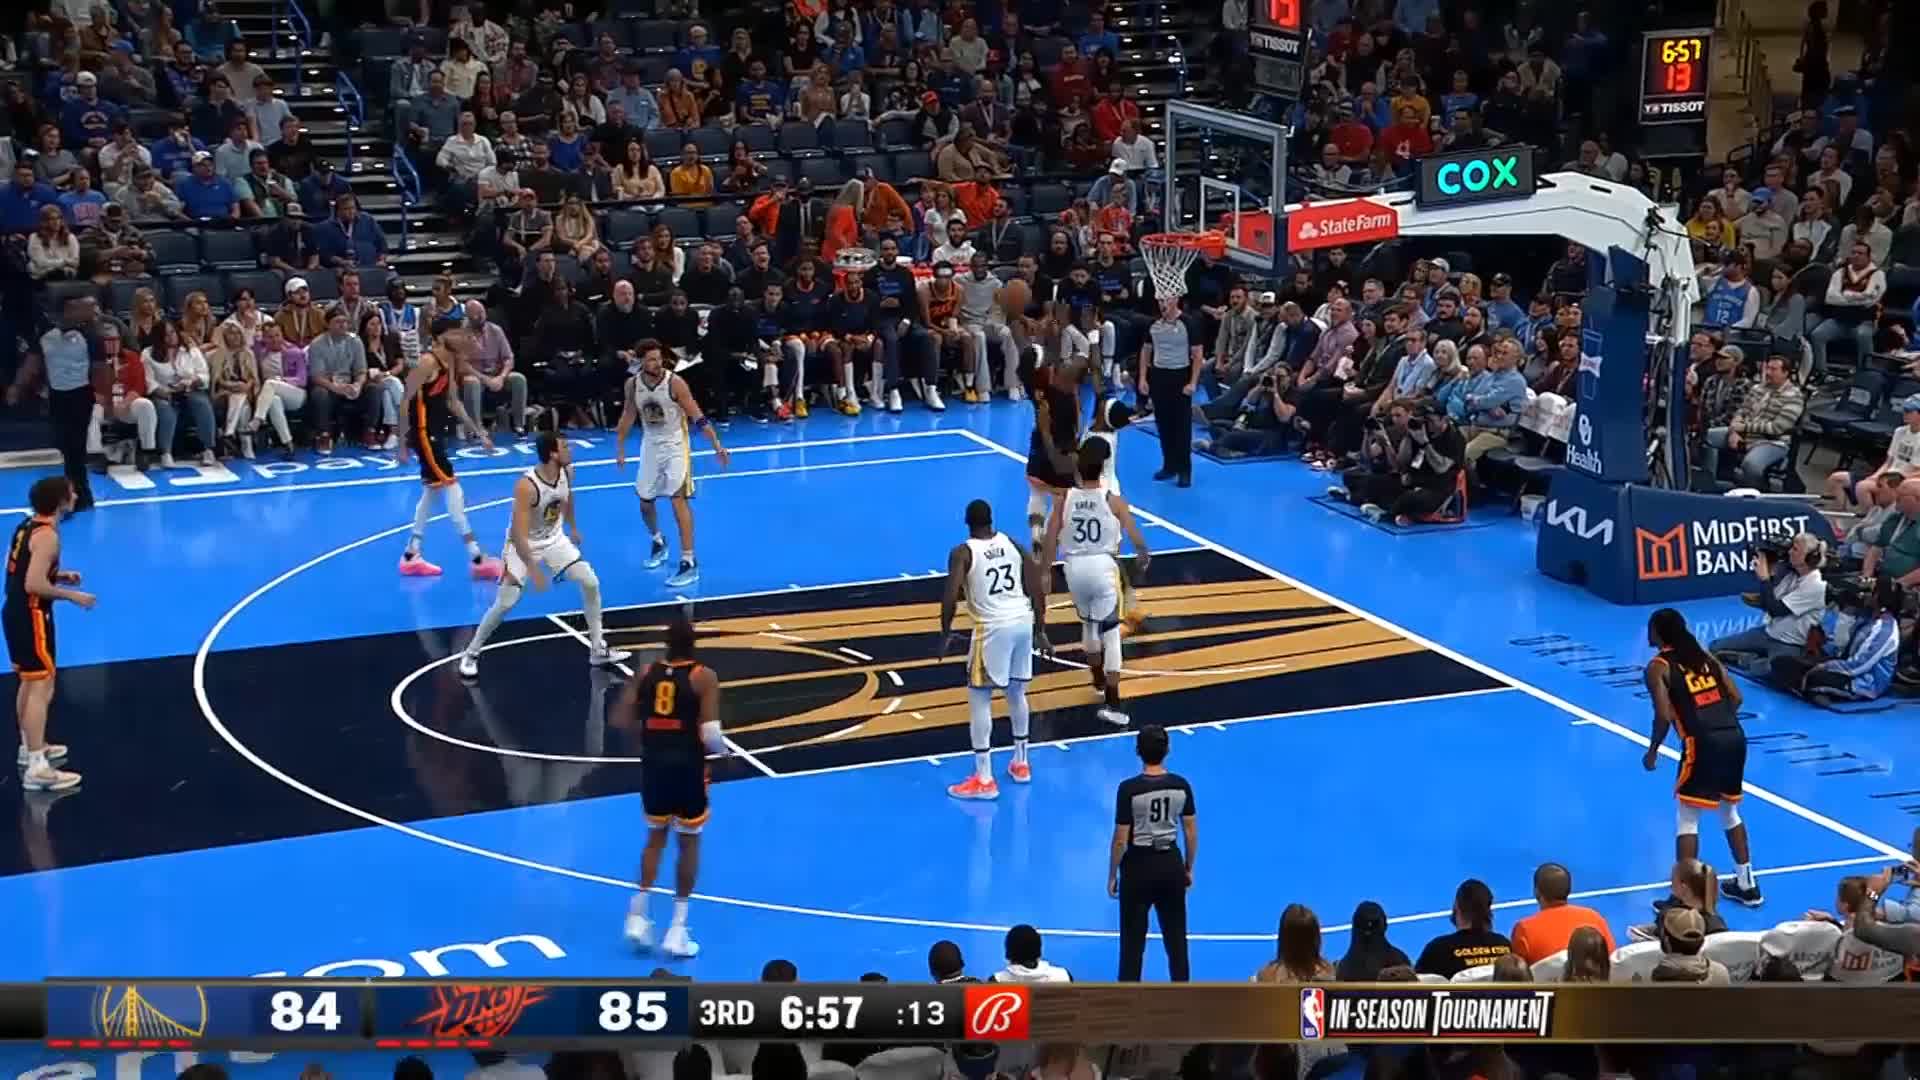 Luguentz Dort with the And-1!